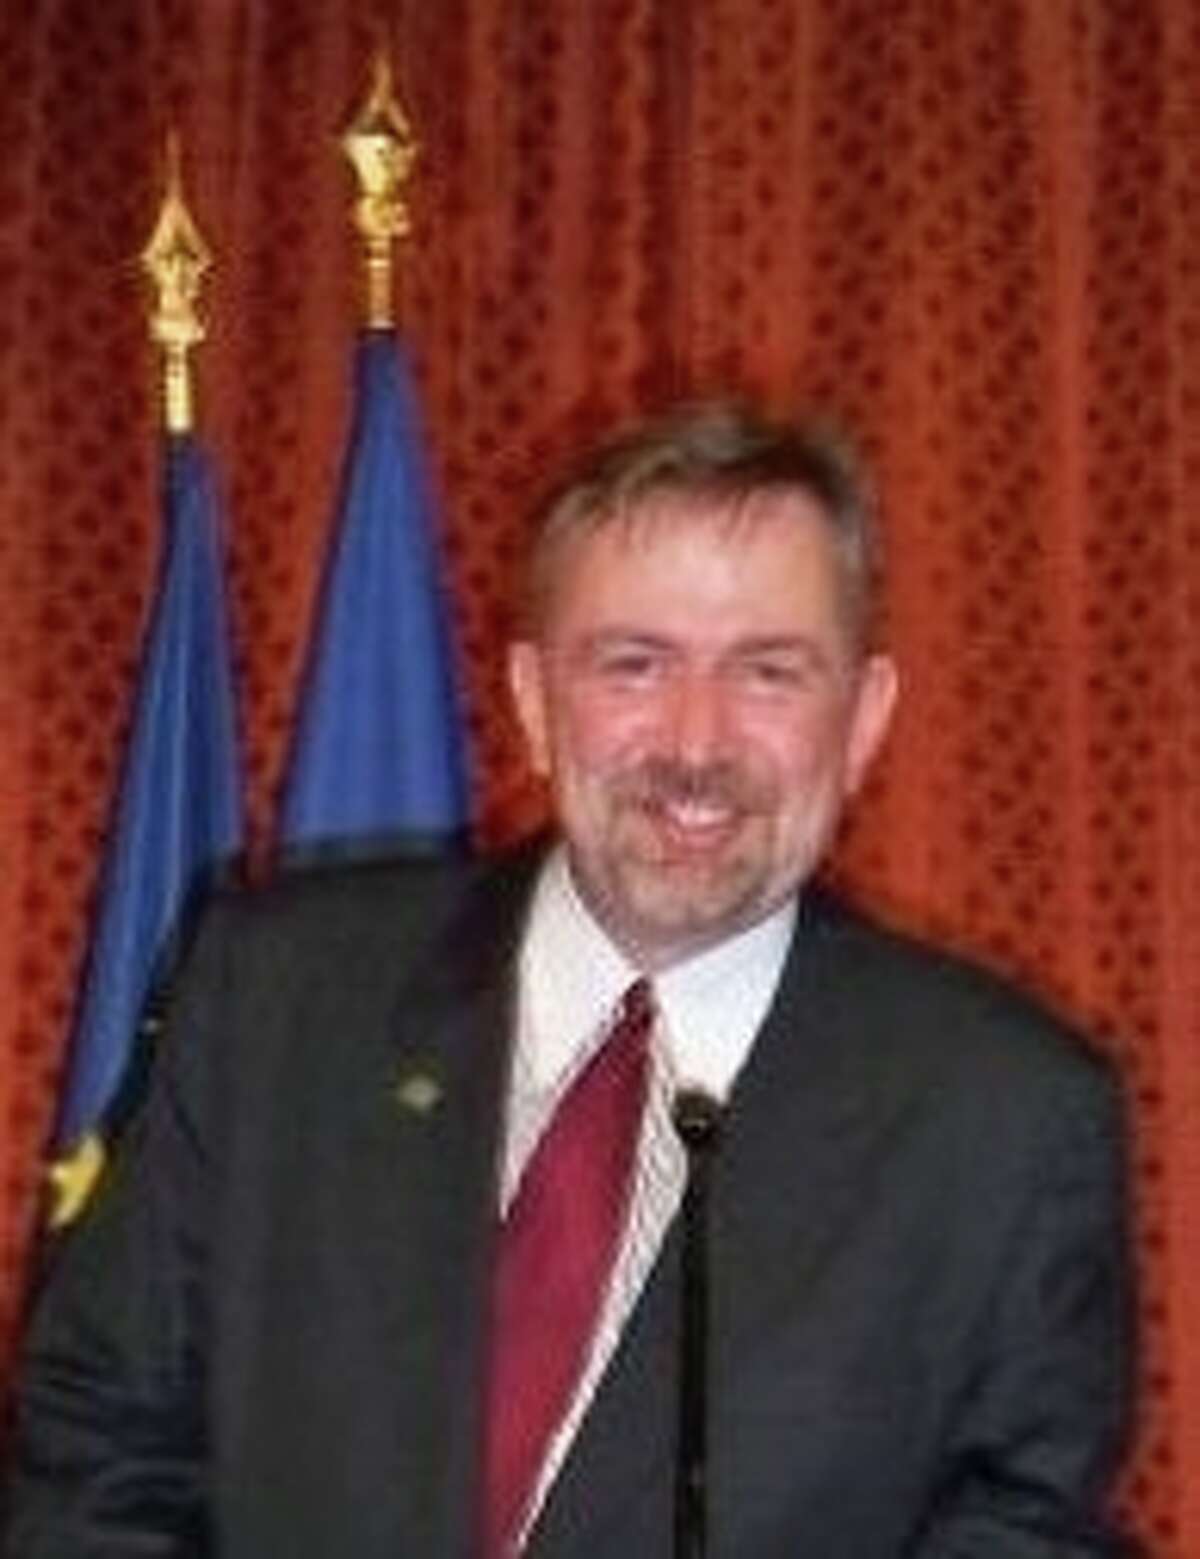 Steve Stockman. Photo courtesy of the Steve Stockman for Congress Facebook page.